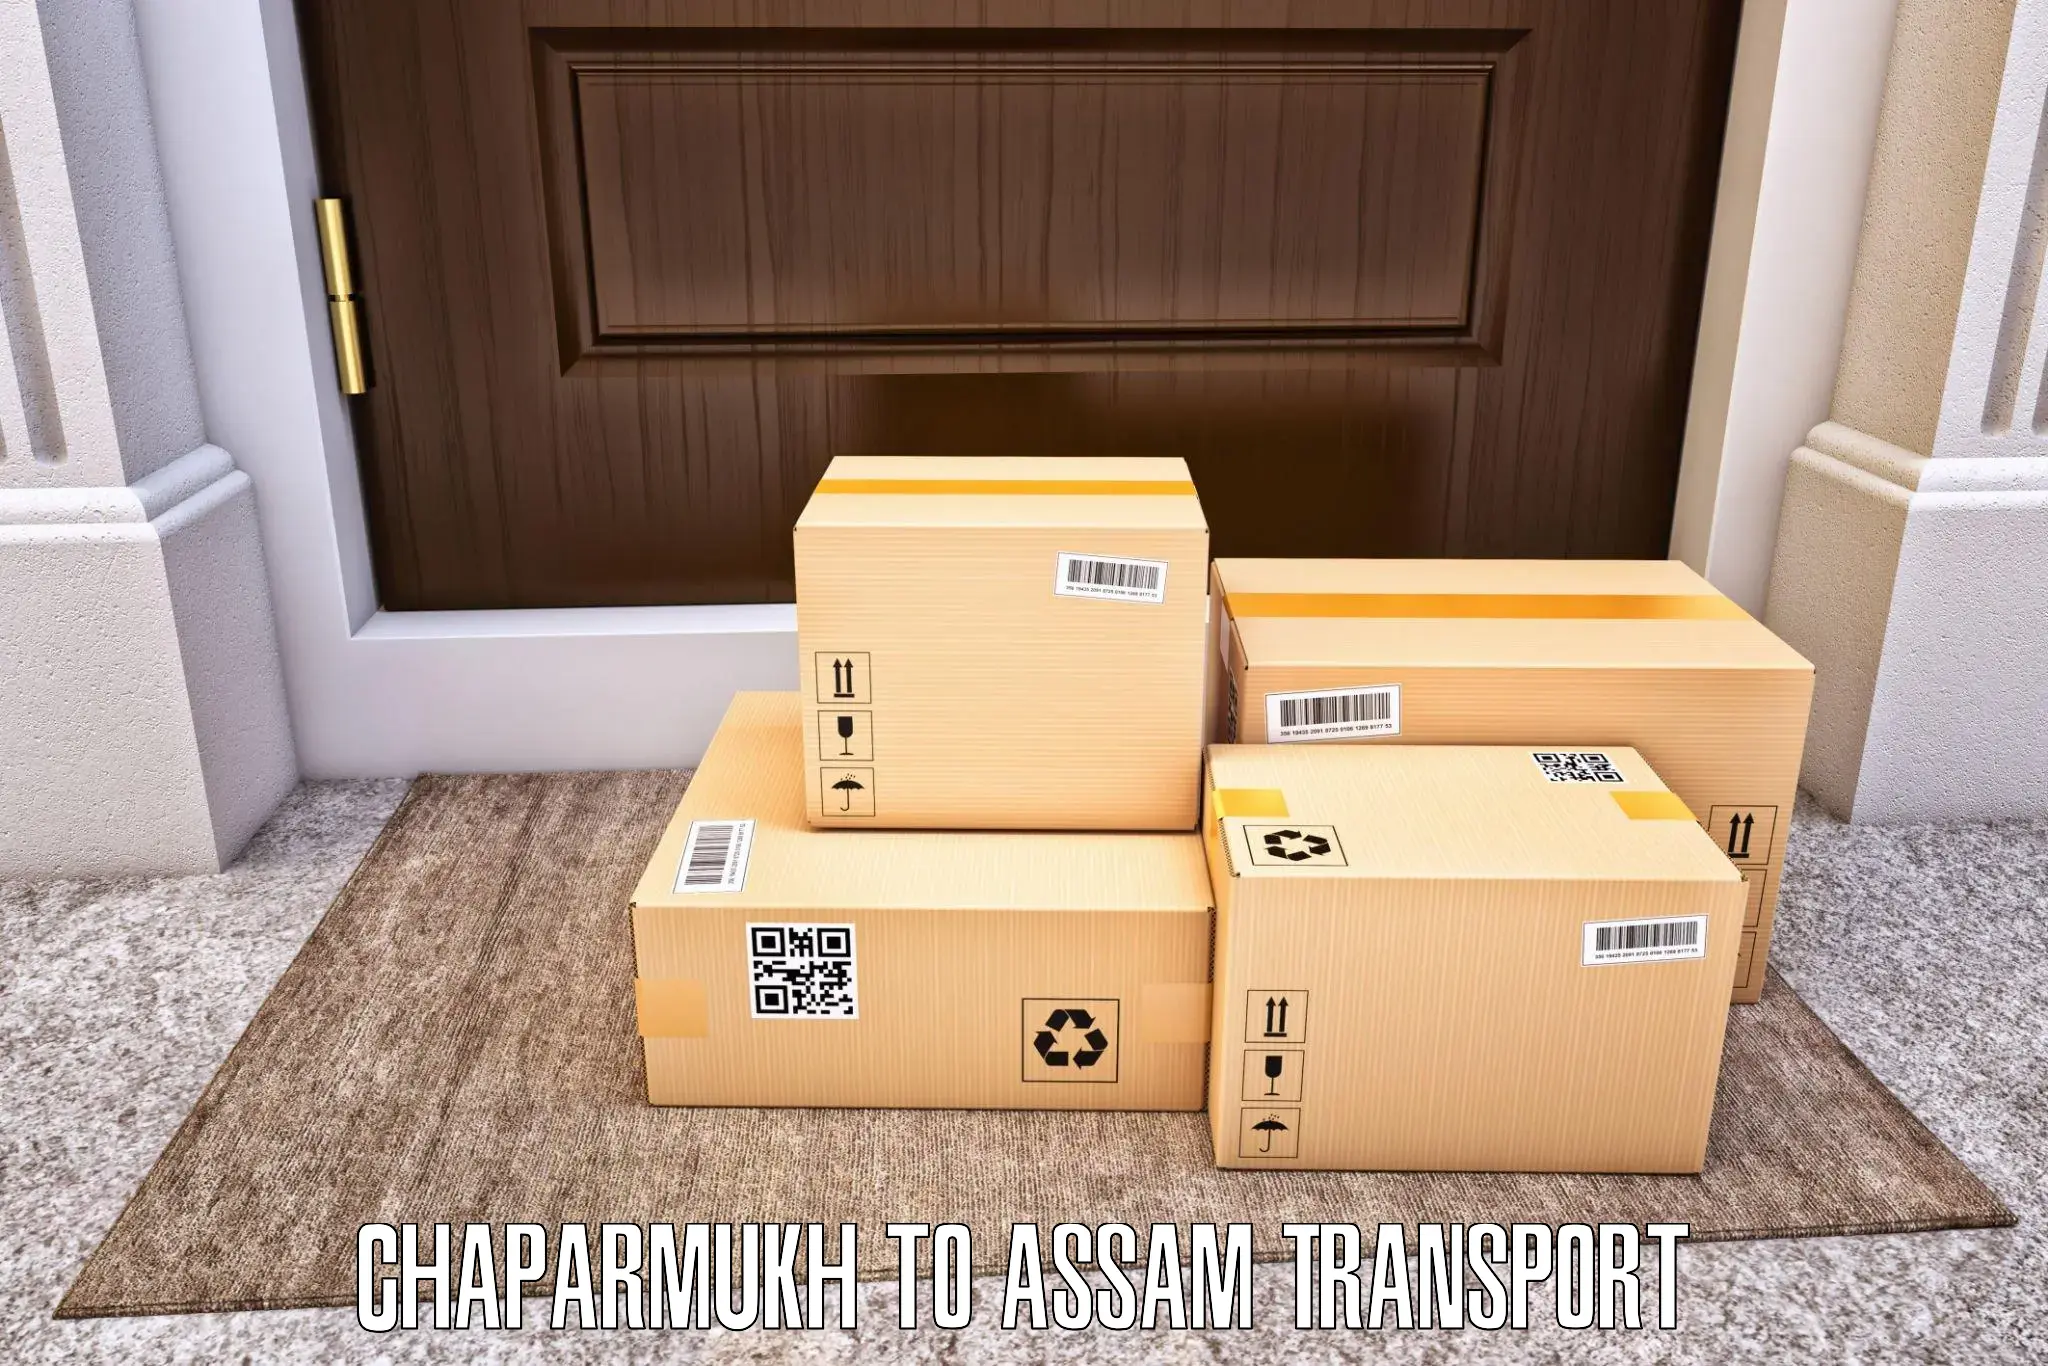 Vehicle transport services Chaparmukh to Pathsala